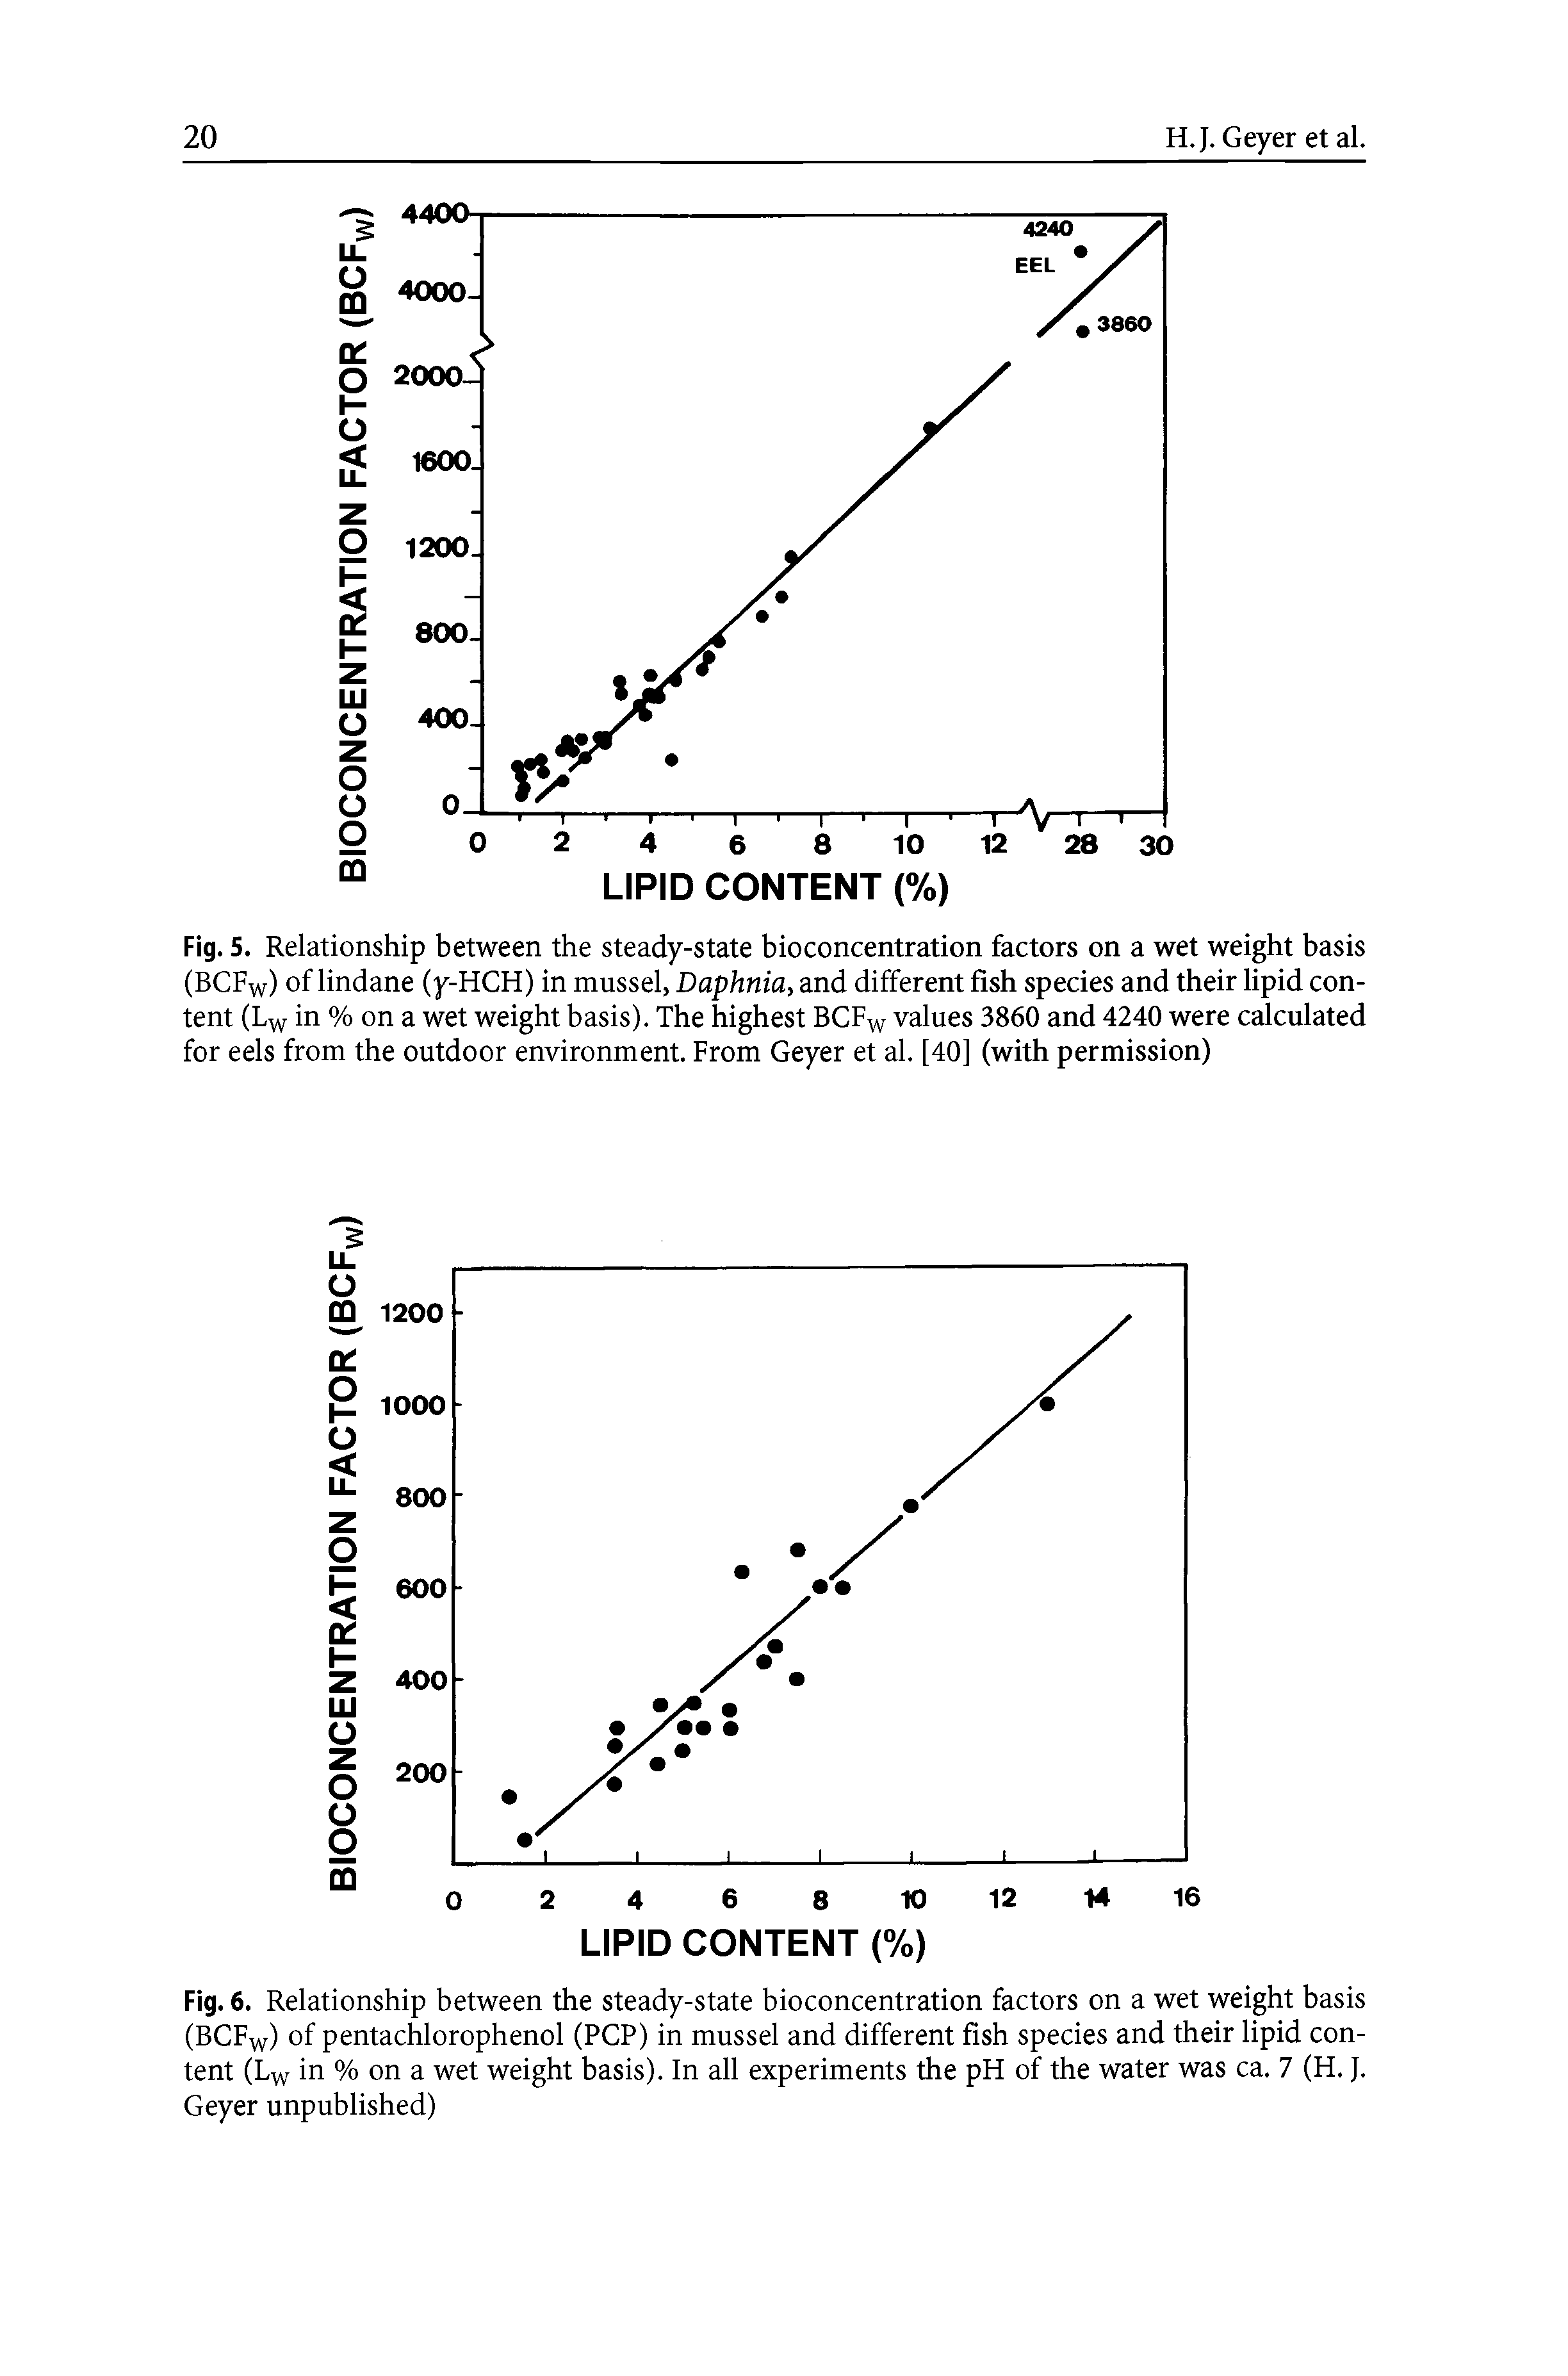 Fig. 5. Relationship between the steady-state bioconcentration factors on a wet weight basis (BCFw) of lindane (y-HCH) in mussel, Daphnia, and different fish species and their lipid content (Lw in % on a wet weight basis). The highest BCF values 3860 and 4240 were calculated for eels from the outdoor environment. From Geyer et al. [40] (with permission)...